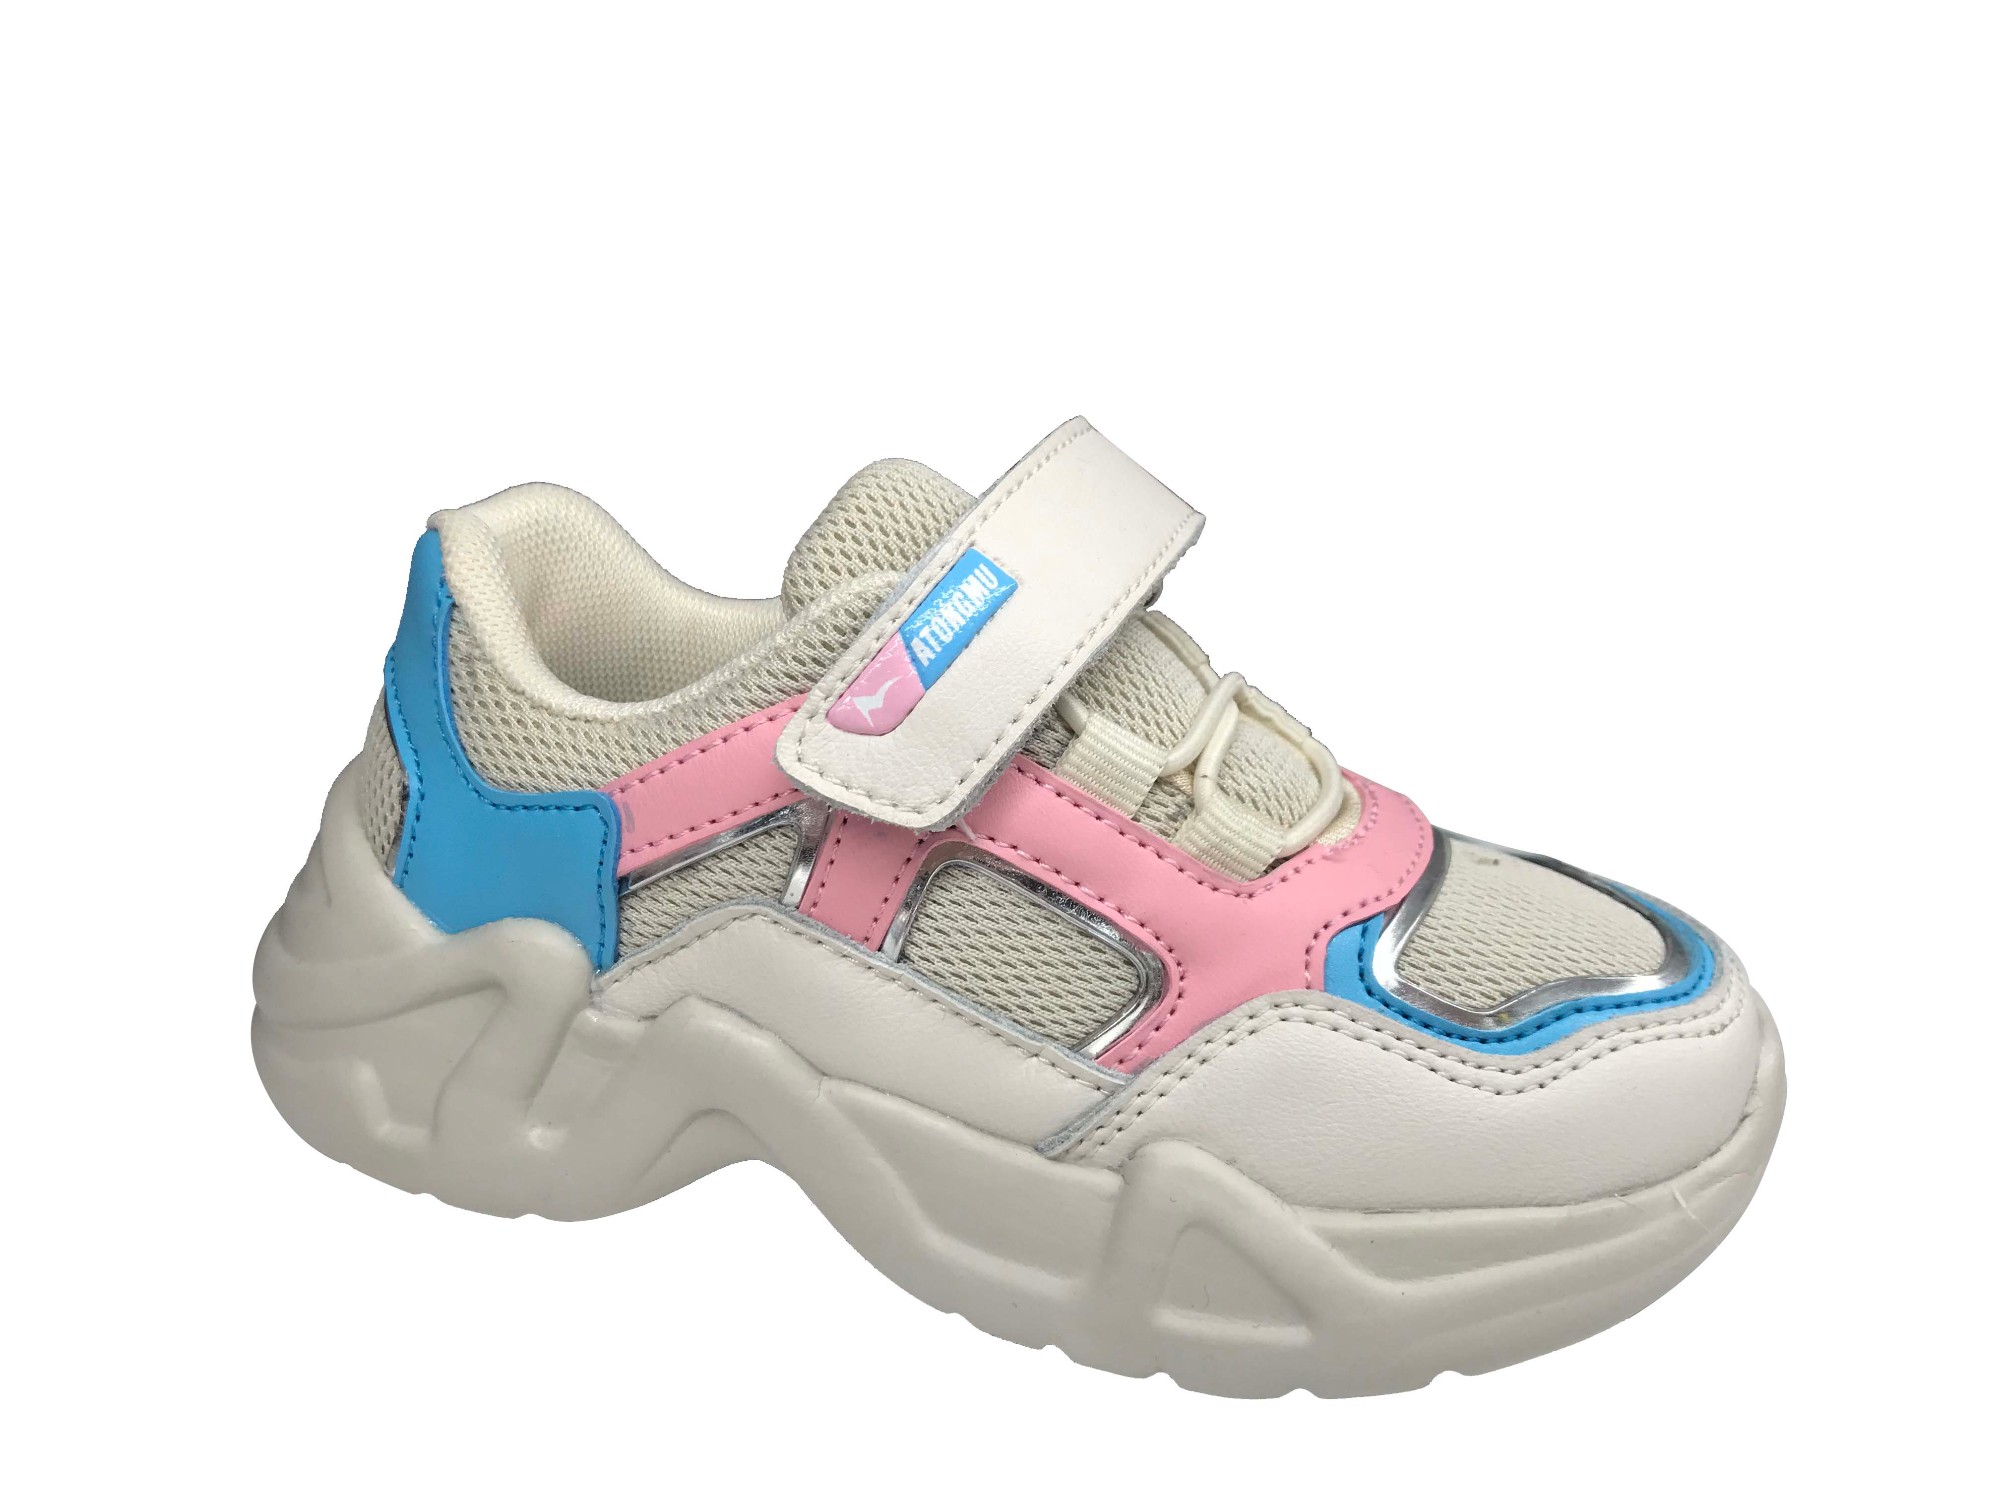 New Design Children Sport Footwear, Cement Outsole Sport Shoes for Kids Manufacturers, New Design Children Sport Footwear, Cement Outsole Sport Shoes for Kids Factory, Supply New Design Children Sport Footwear, Cement Outsole Sport Shoes for Kids